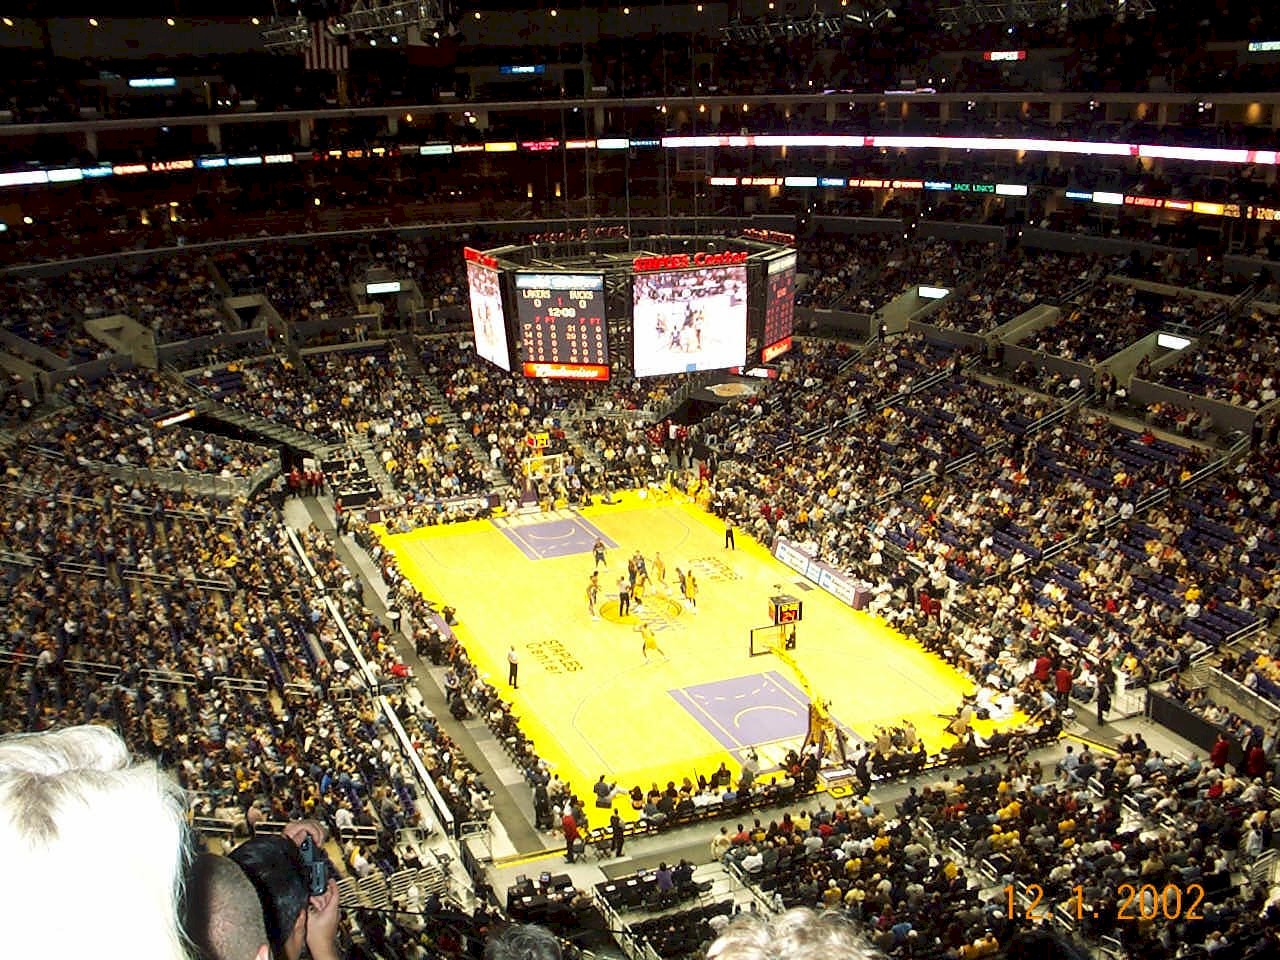 La lakers stadium please select one of these options bitstamp